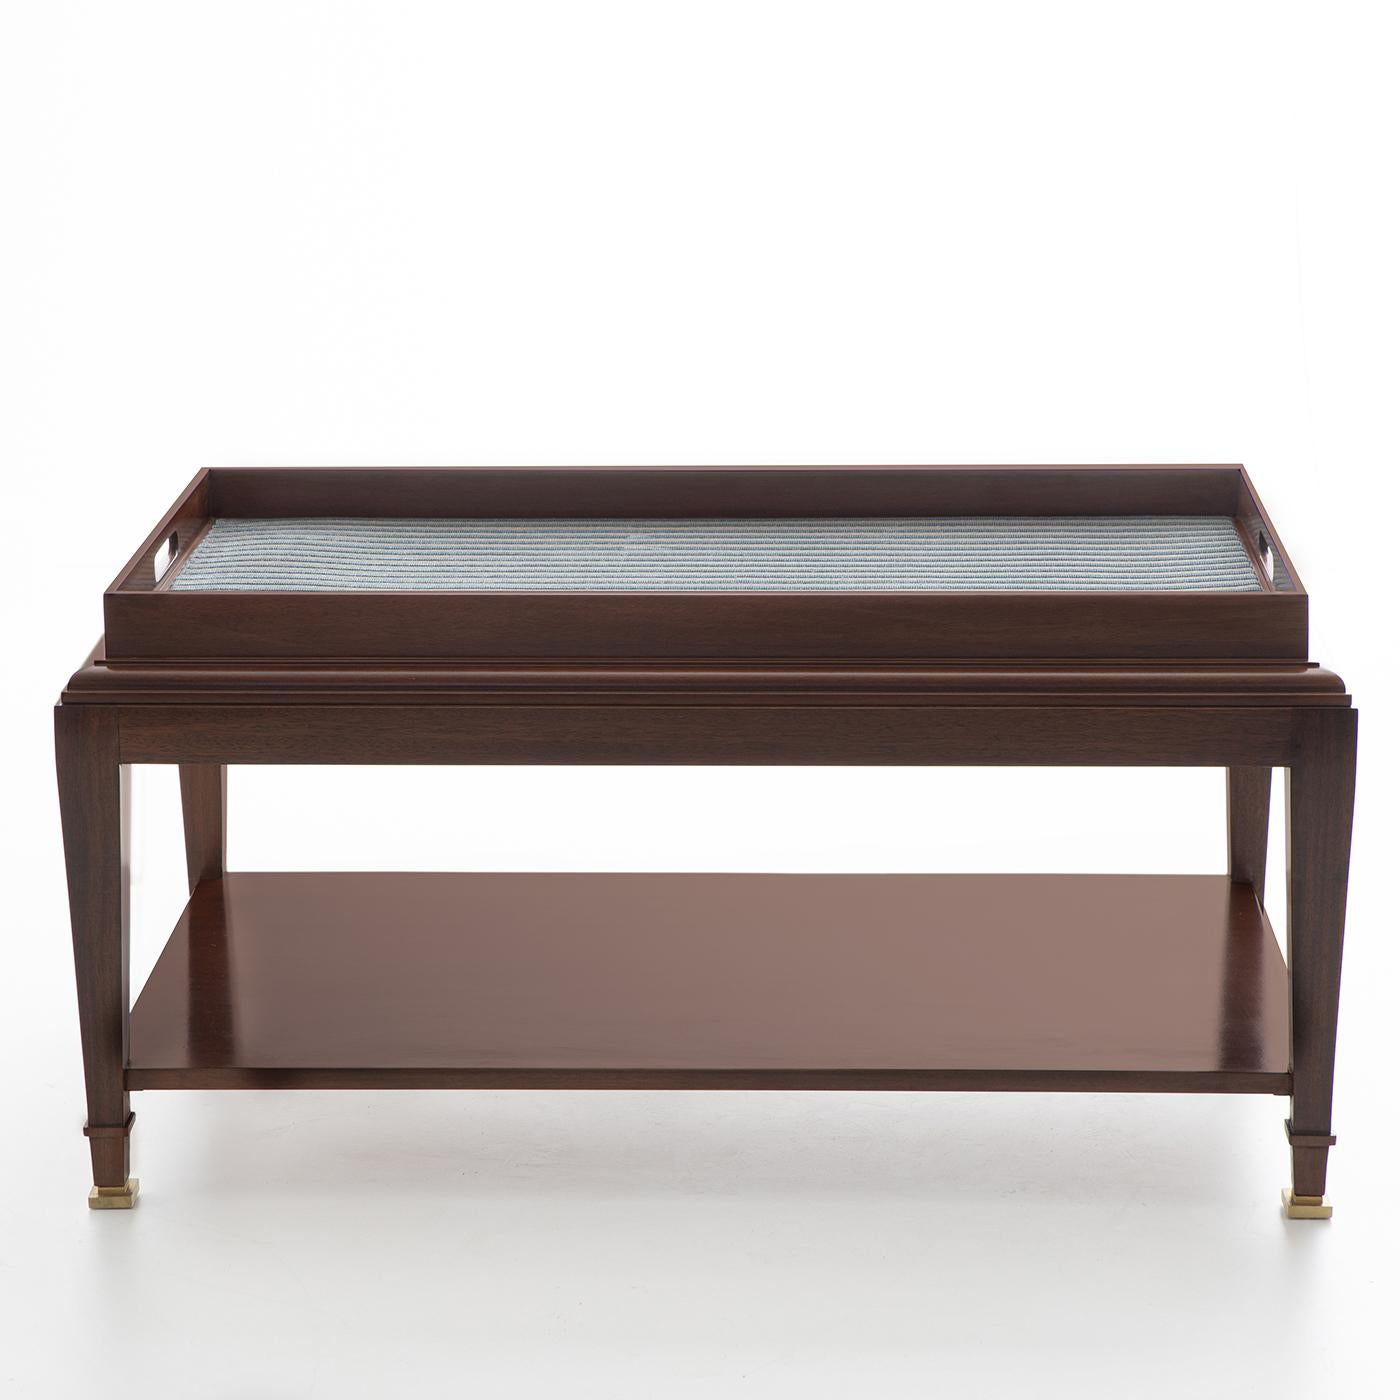 The elegant and versatile character of this precious coffee table in mahogany makes it a superb addition for classic or modern interiors. The wide top is enriched with a smooth fabric upholstery whose color can be customized to best fit any color